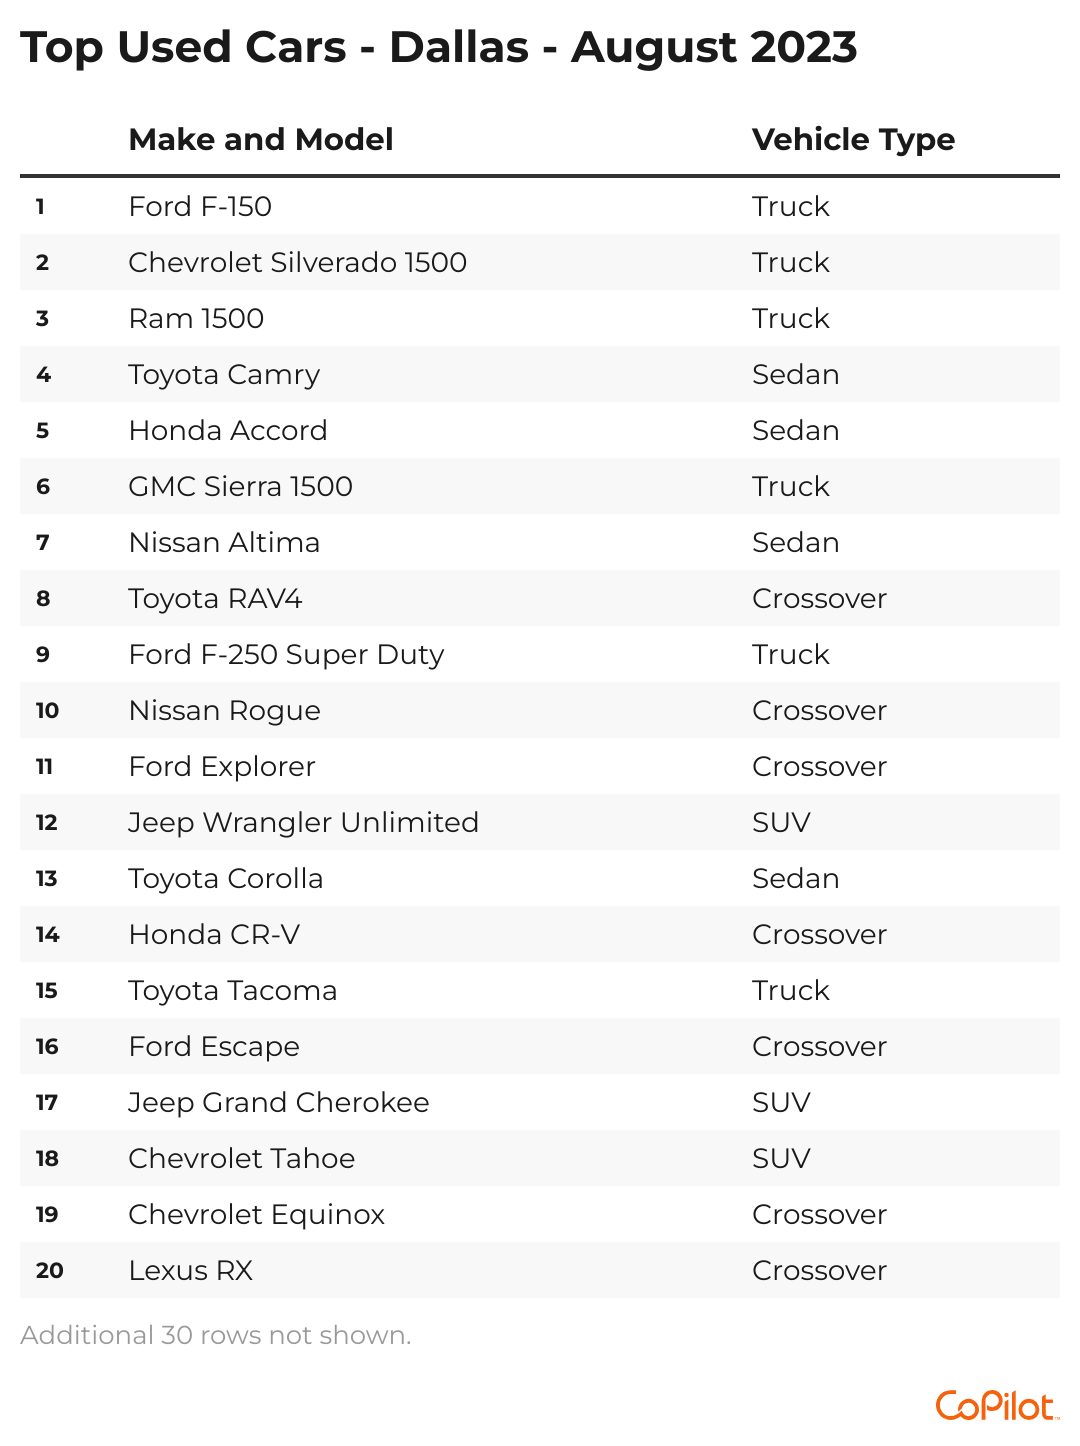 A chart showing the 20 top-selling used cars in the Dallas metro area